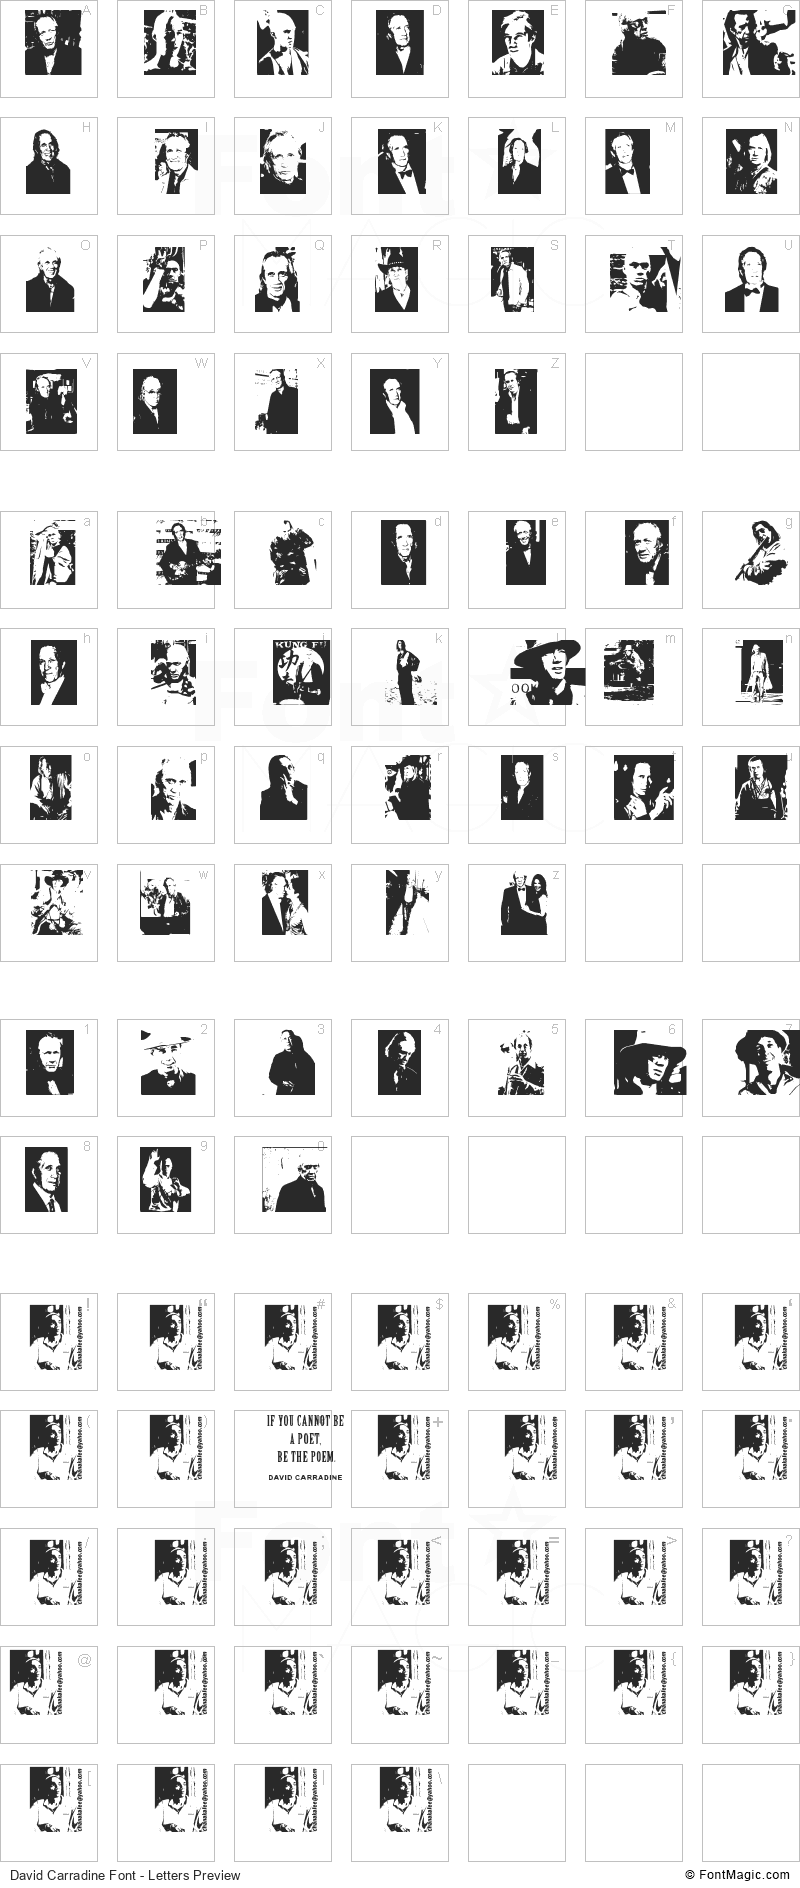 David Carradine Font - All Latters Preview Chart